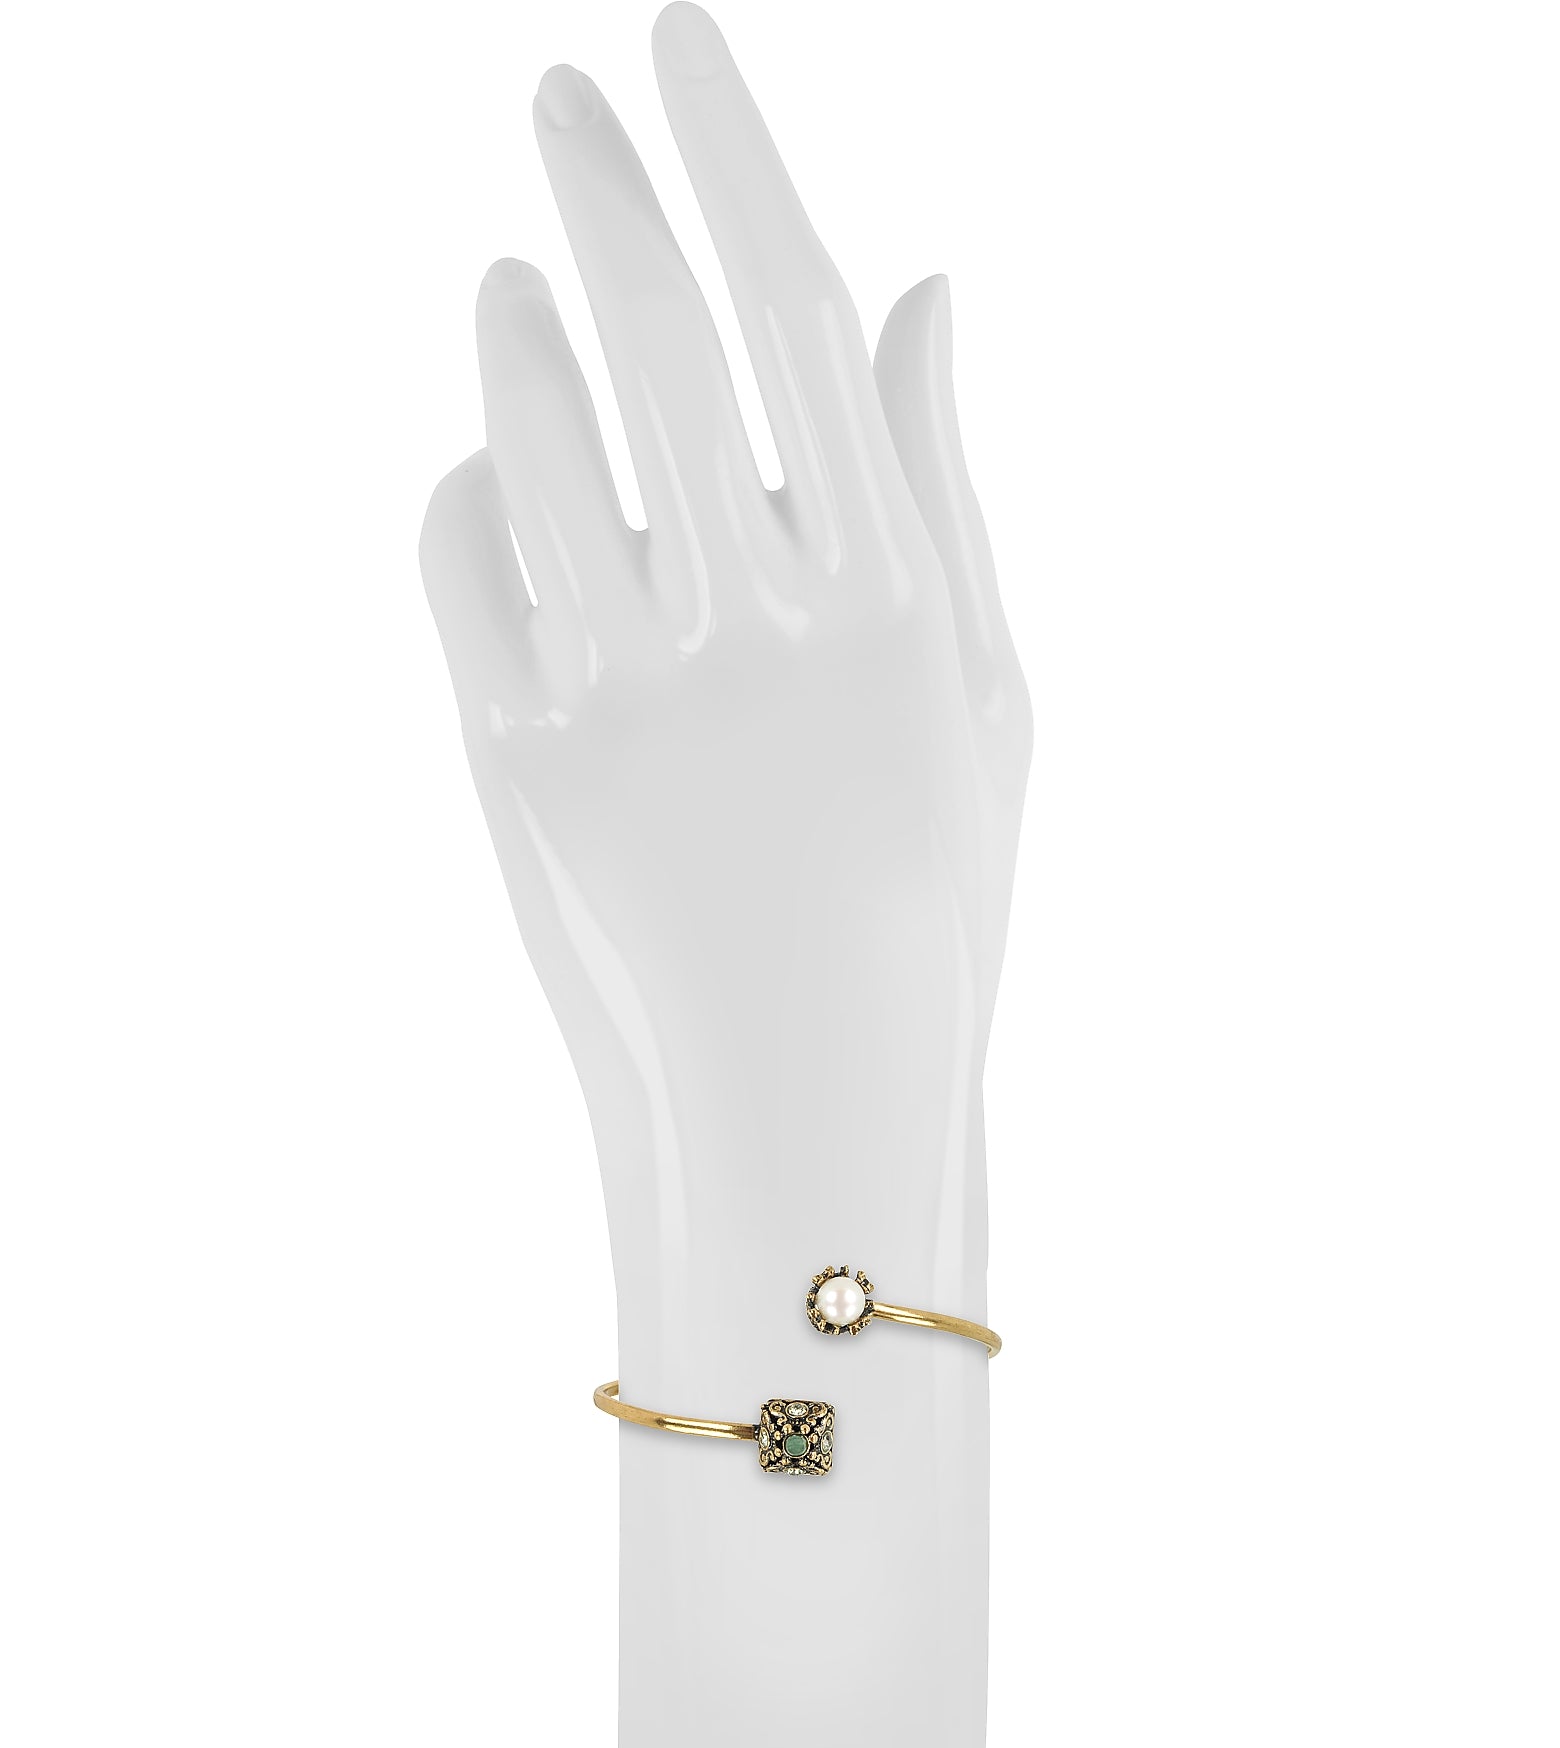 Alcozer Crown and Pyramid Cuff Bracelet / Emeralds, Pearl - 0